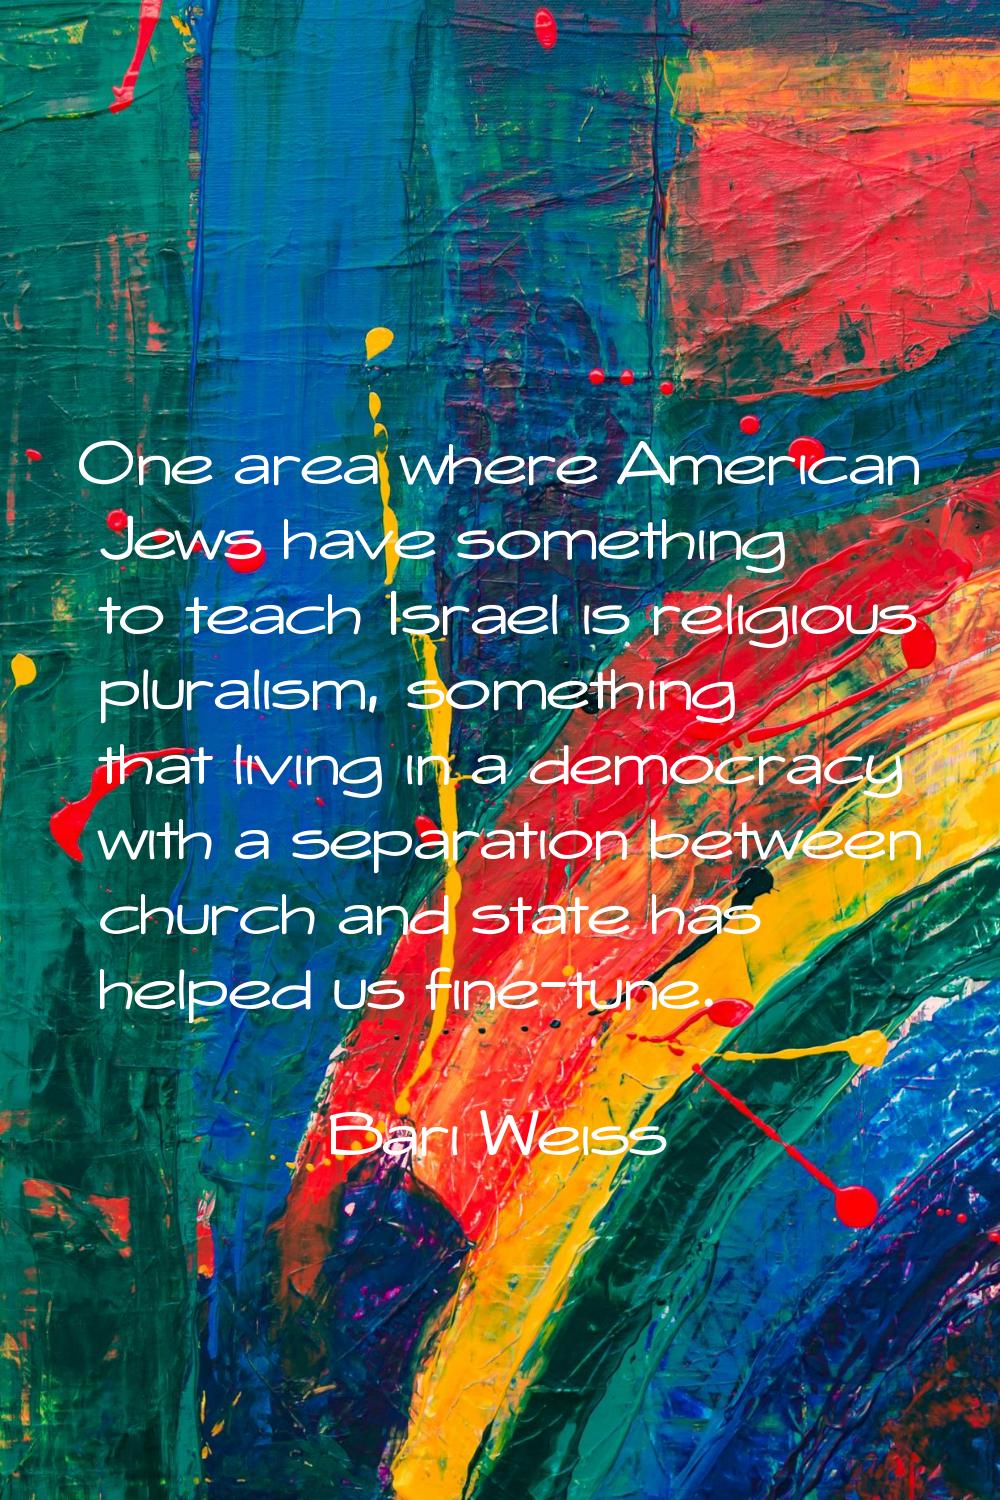 One area where American Jews have something to teach Israel is religious pluralism, something that 